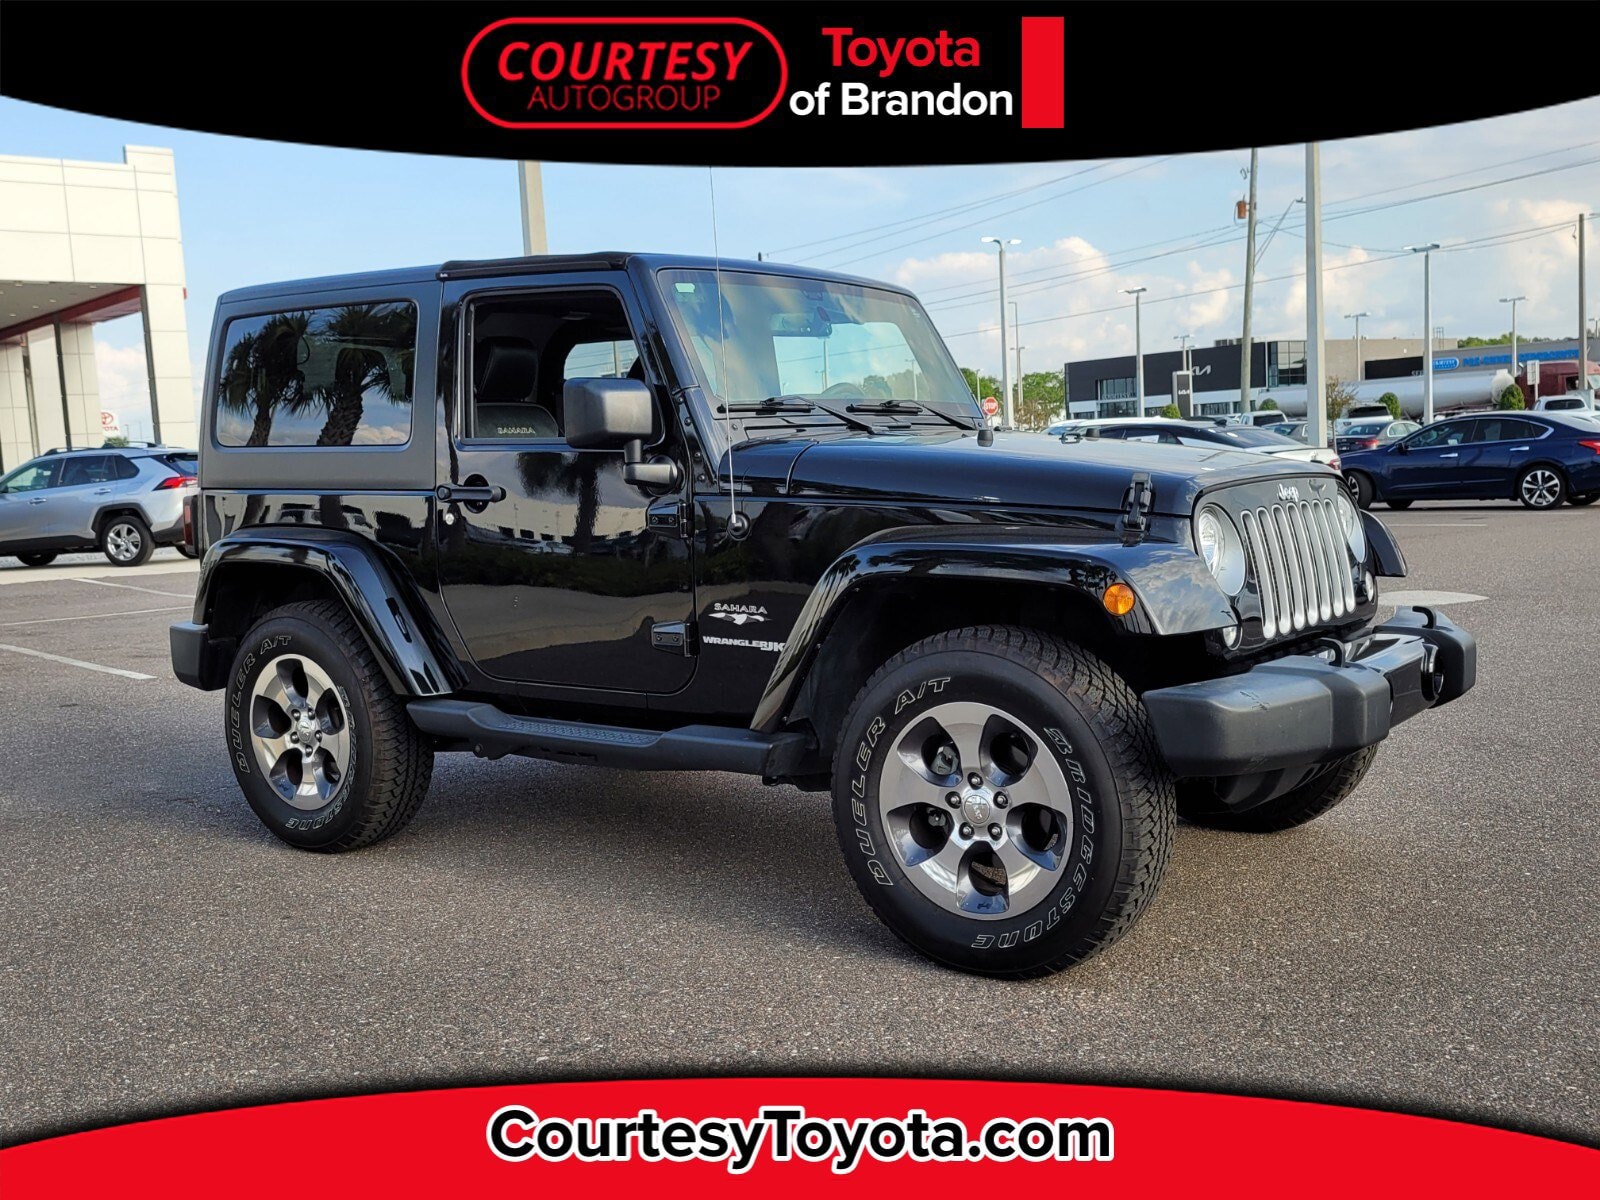 Used Jeep Tampa | Tampa Brandon FL | Pre-Owned Jeeps